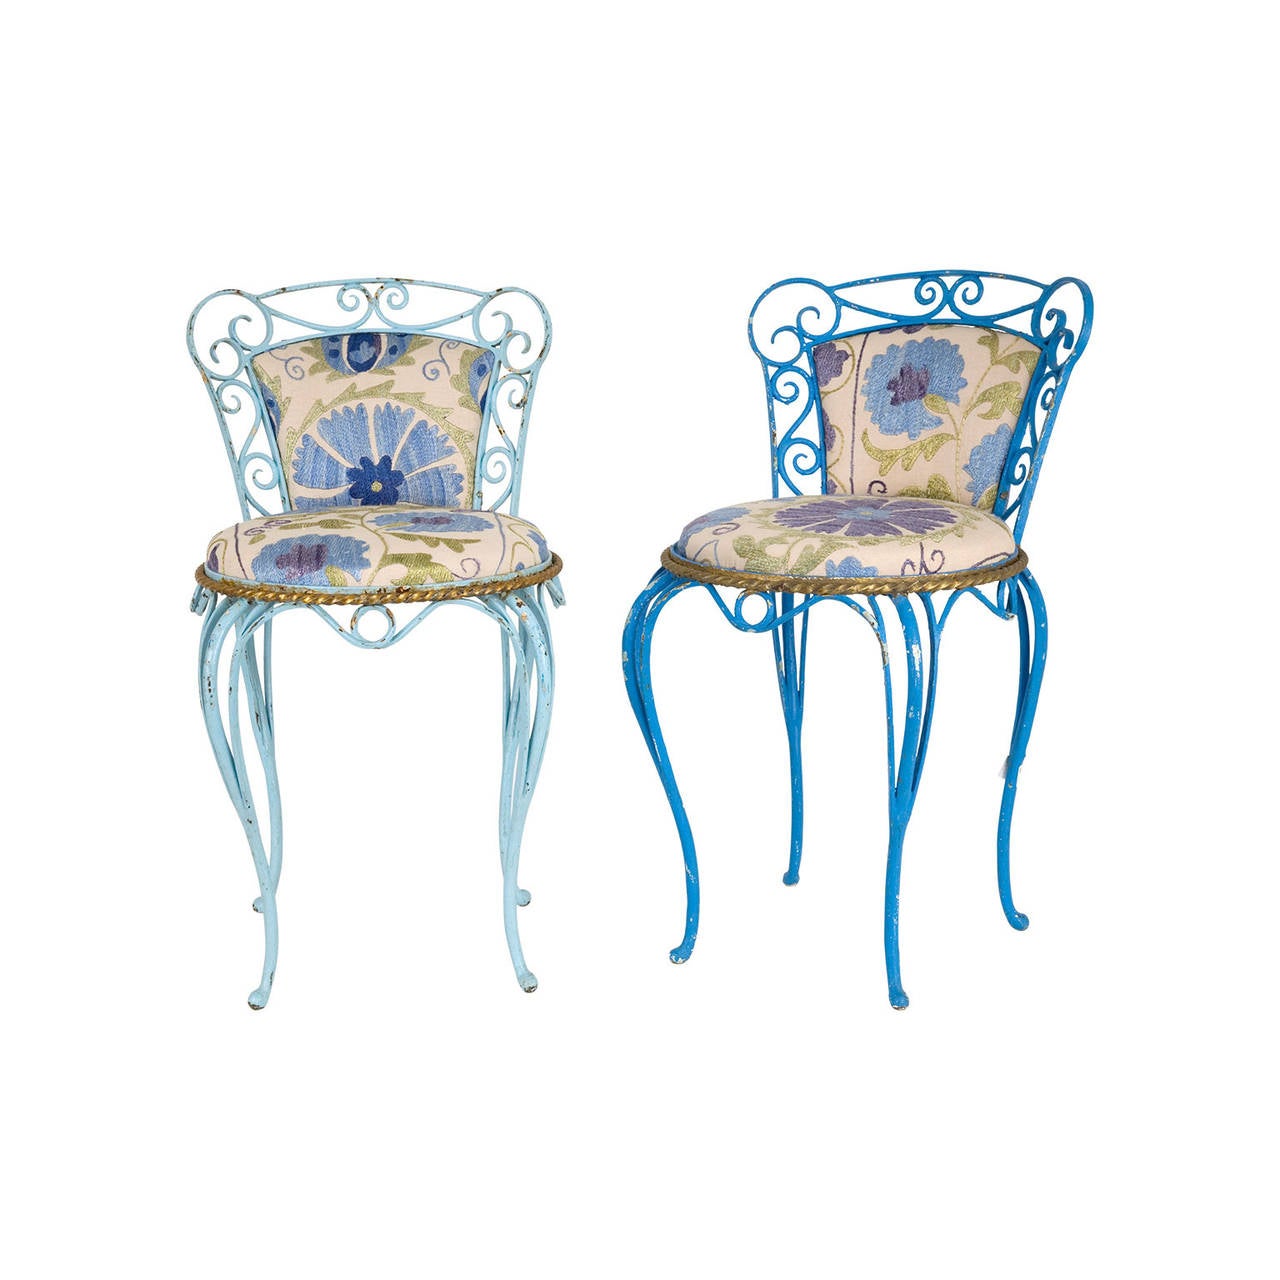 vintage garden chair. weathered painted finish as found. reupholstered in vintage blue suzani. each is unique. pair available (priced individually).